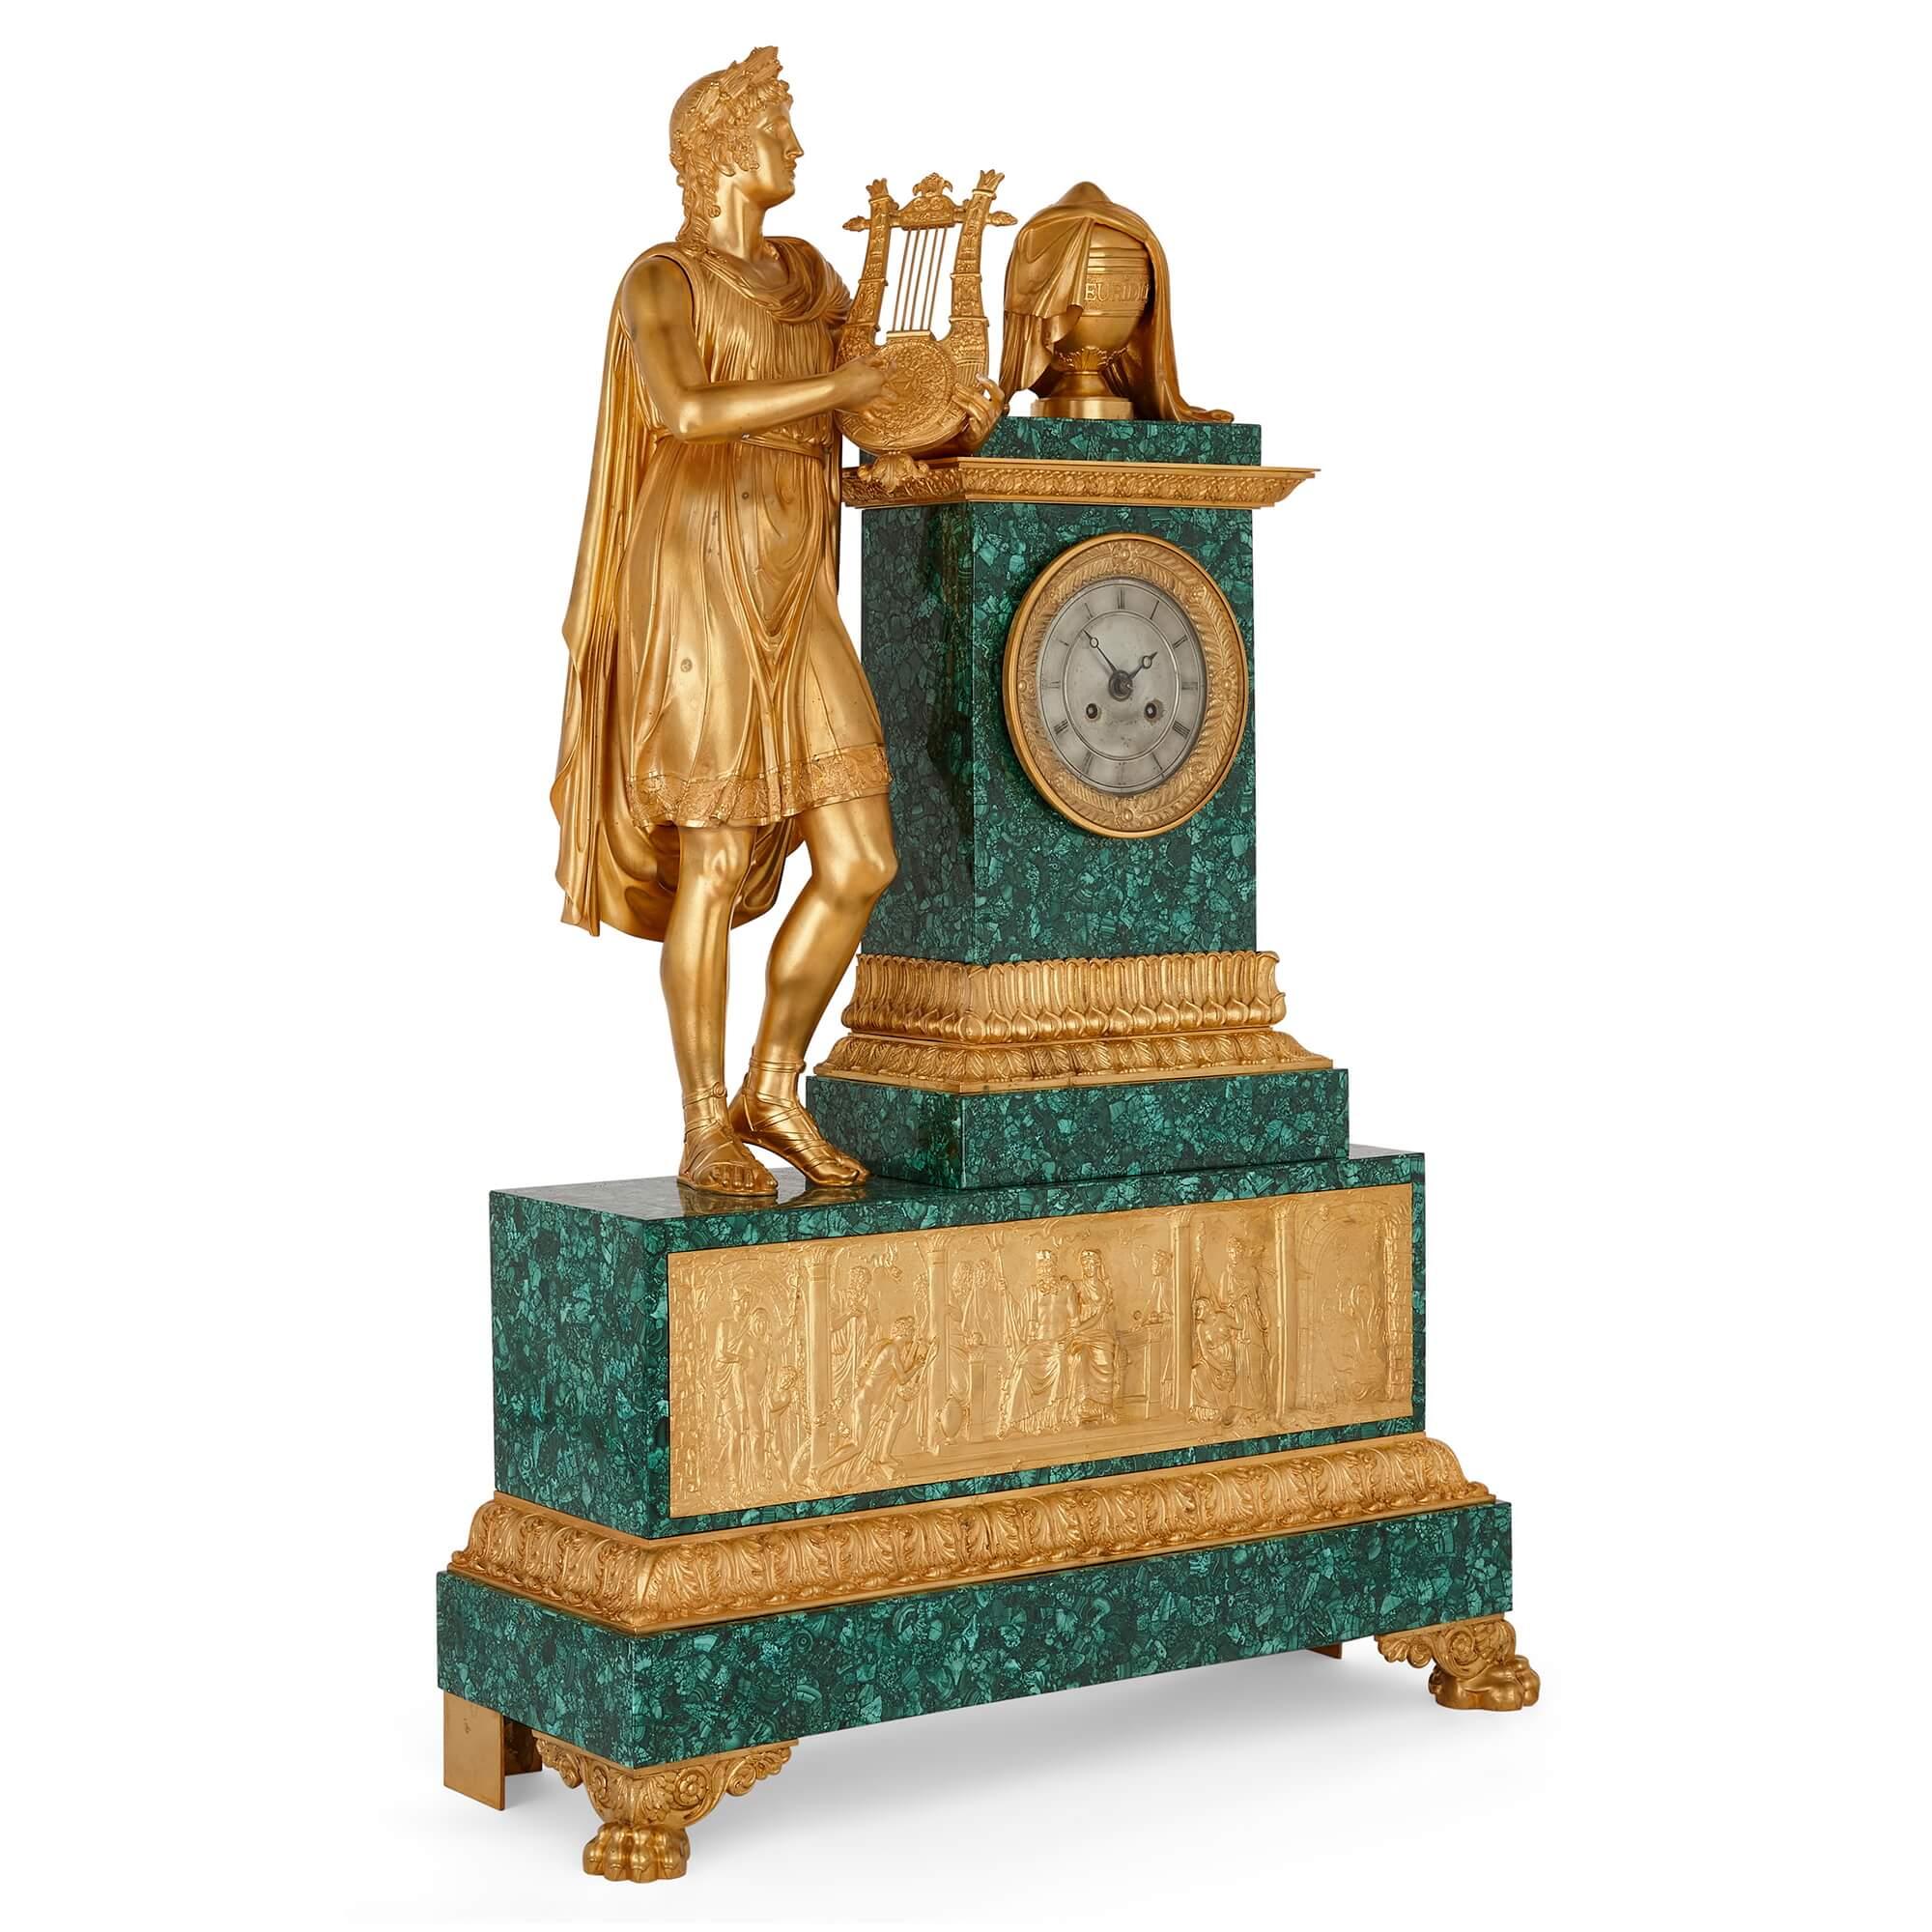 Impressive French Empire period ormolu and malachite sculptural mantel clock
French, c.1825
Measures: Height 92cm, width 63cm, depth 22cm

By Jacquier of Paris, circa 1825, this magnificent, impressive, and exceptionally fine antique clock dates